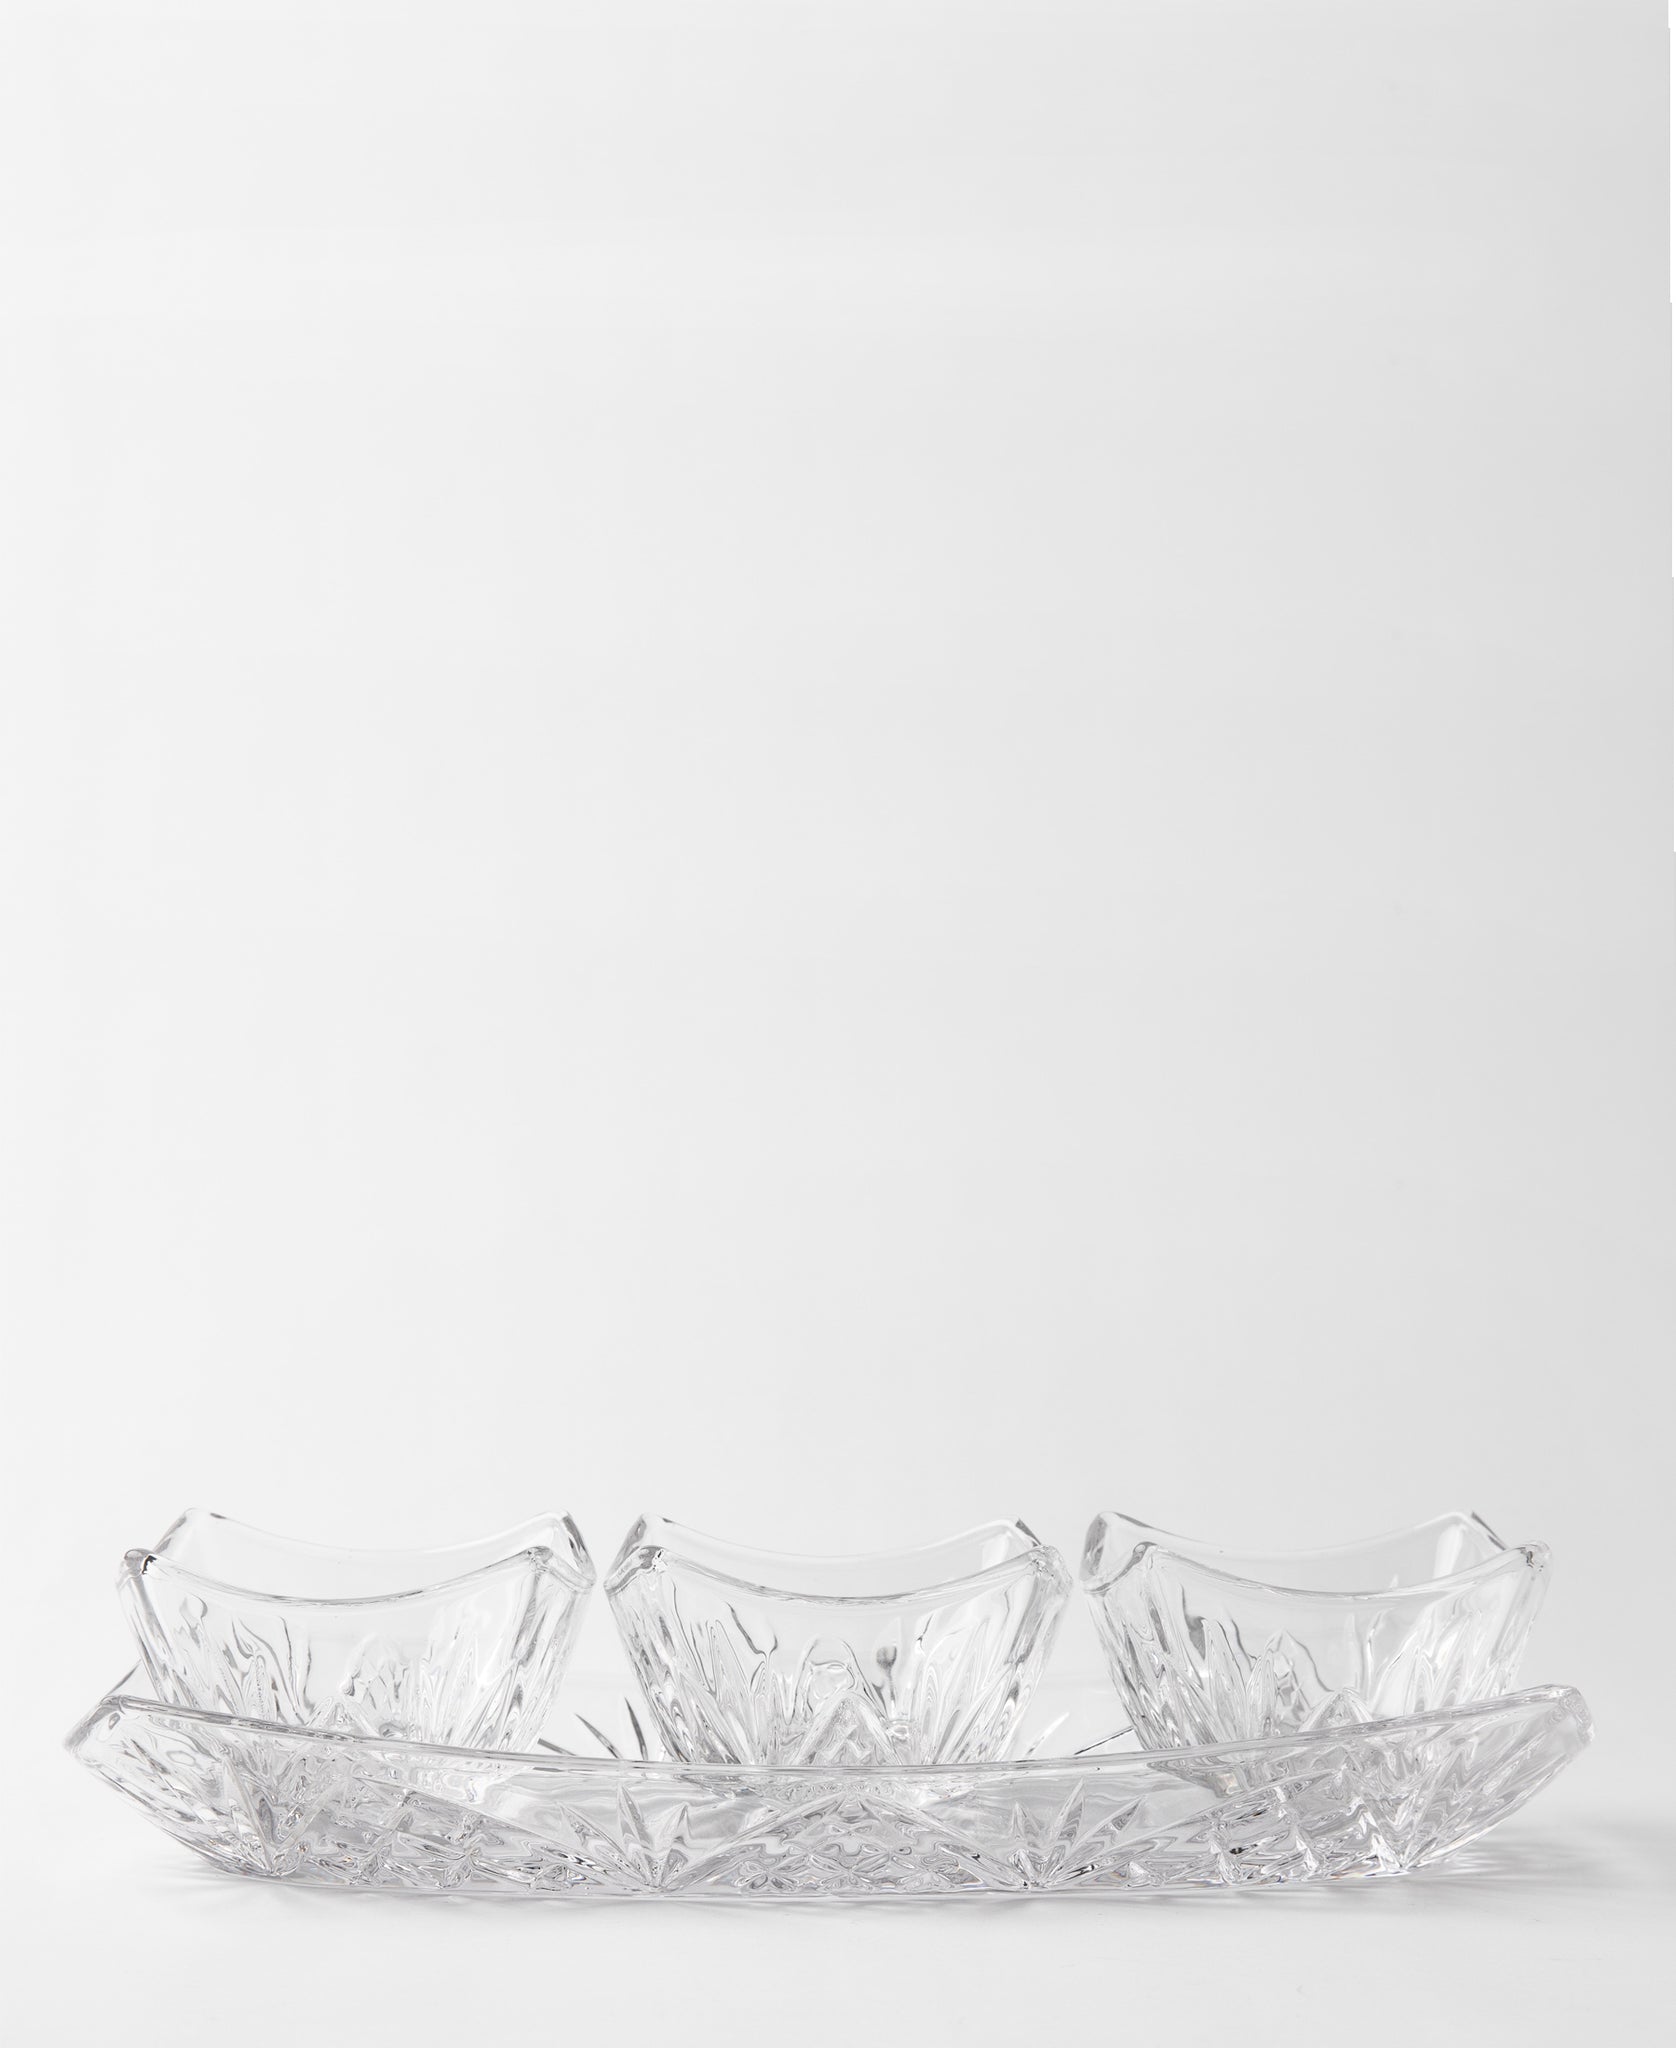 Paris Collection Tray With 3 Bowls - Transparent